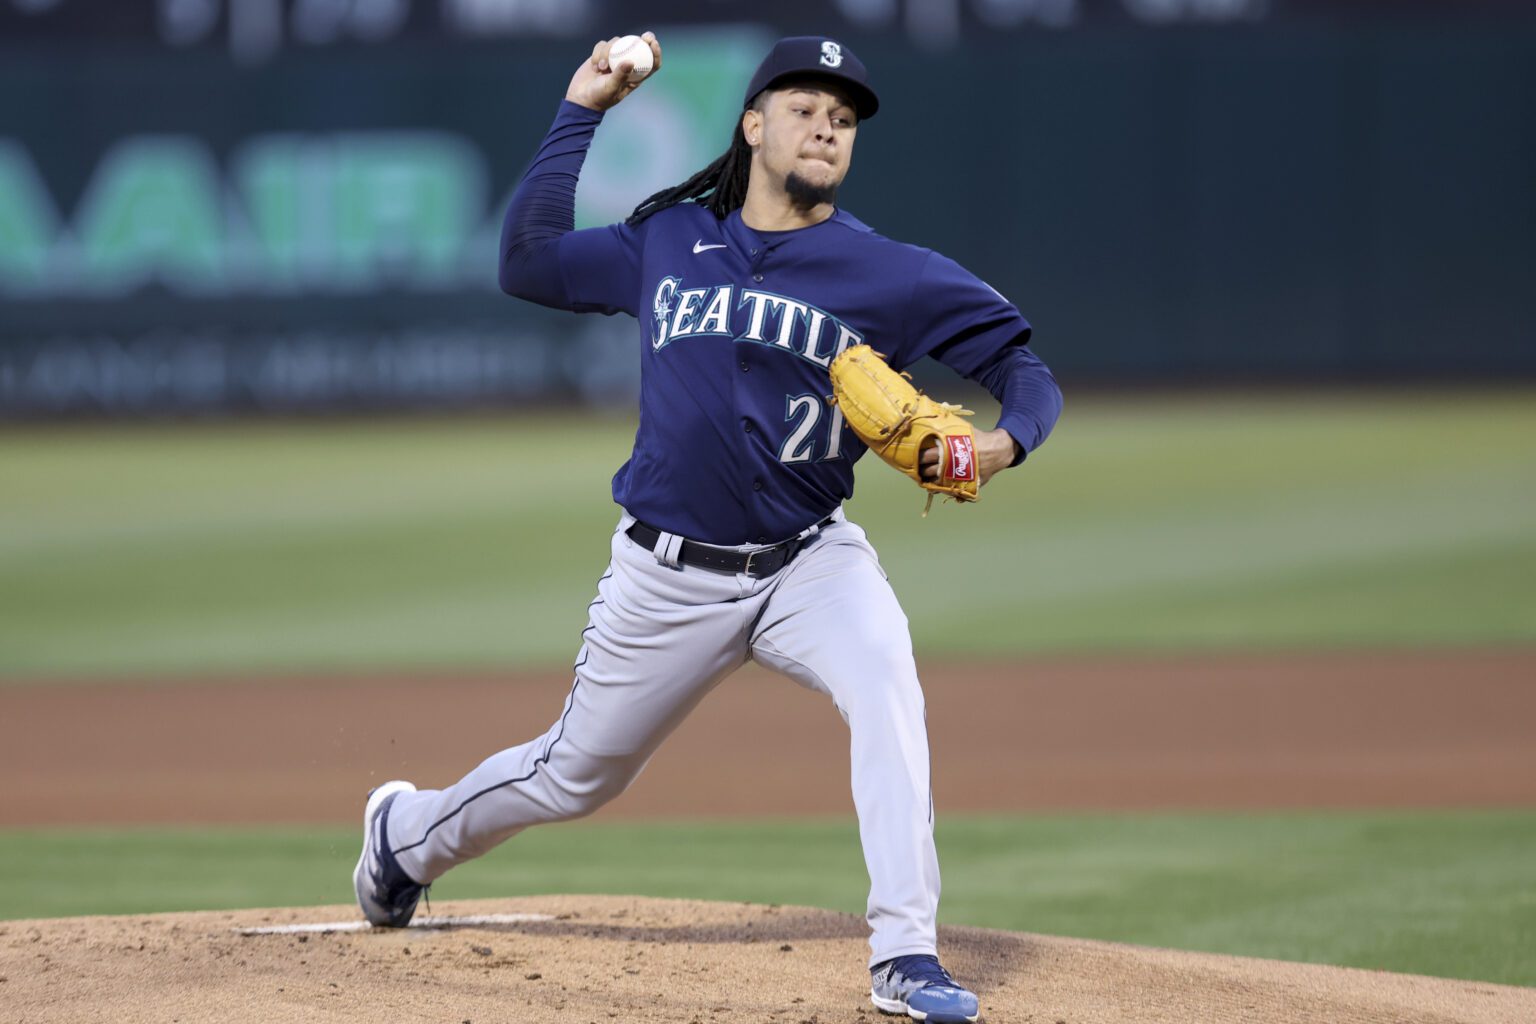 Seattle Mariners' Luis Castillo throws against the Oakland Athletics during the first inning of a baseball game in Oakland